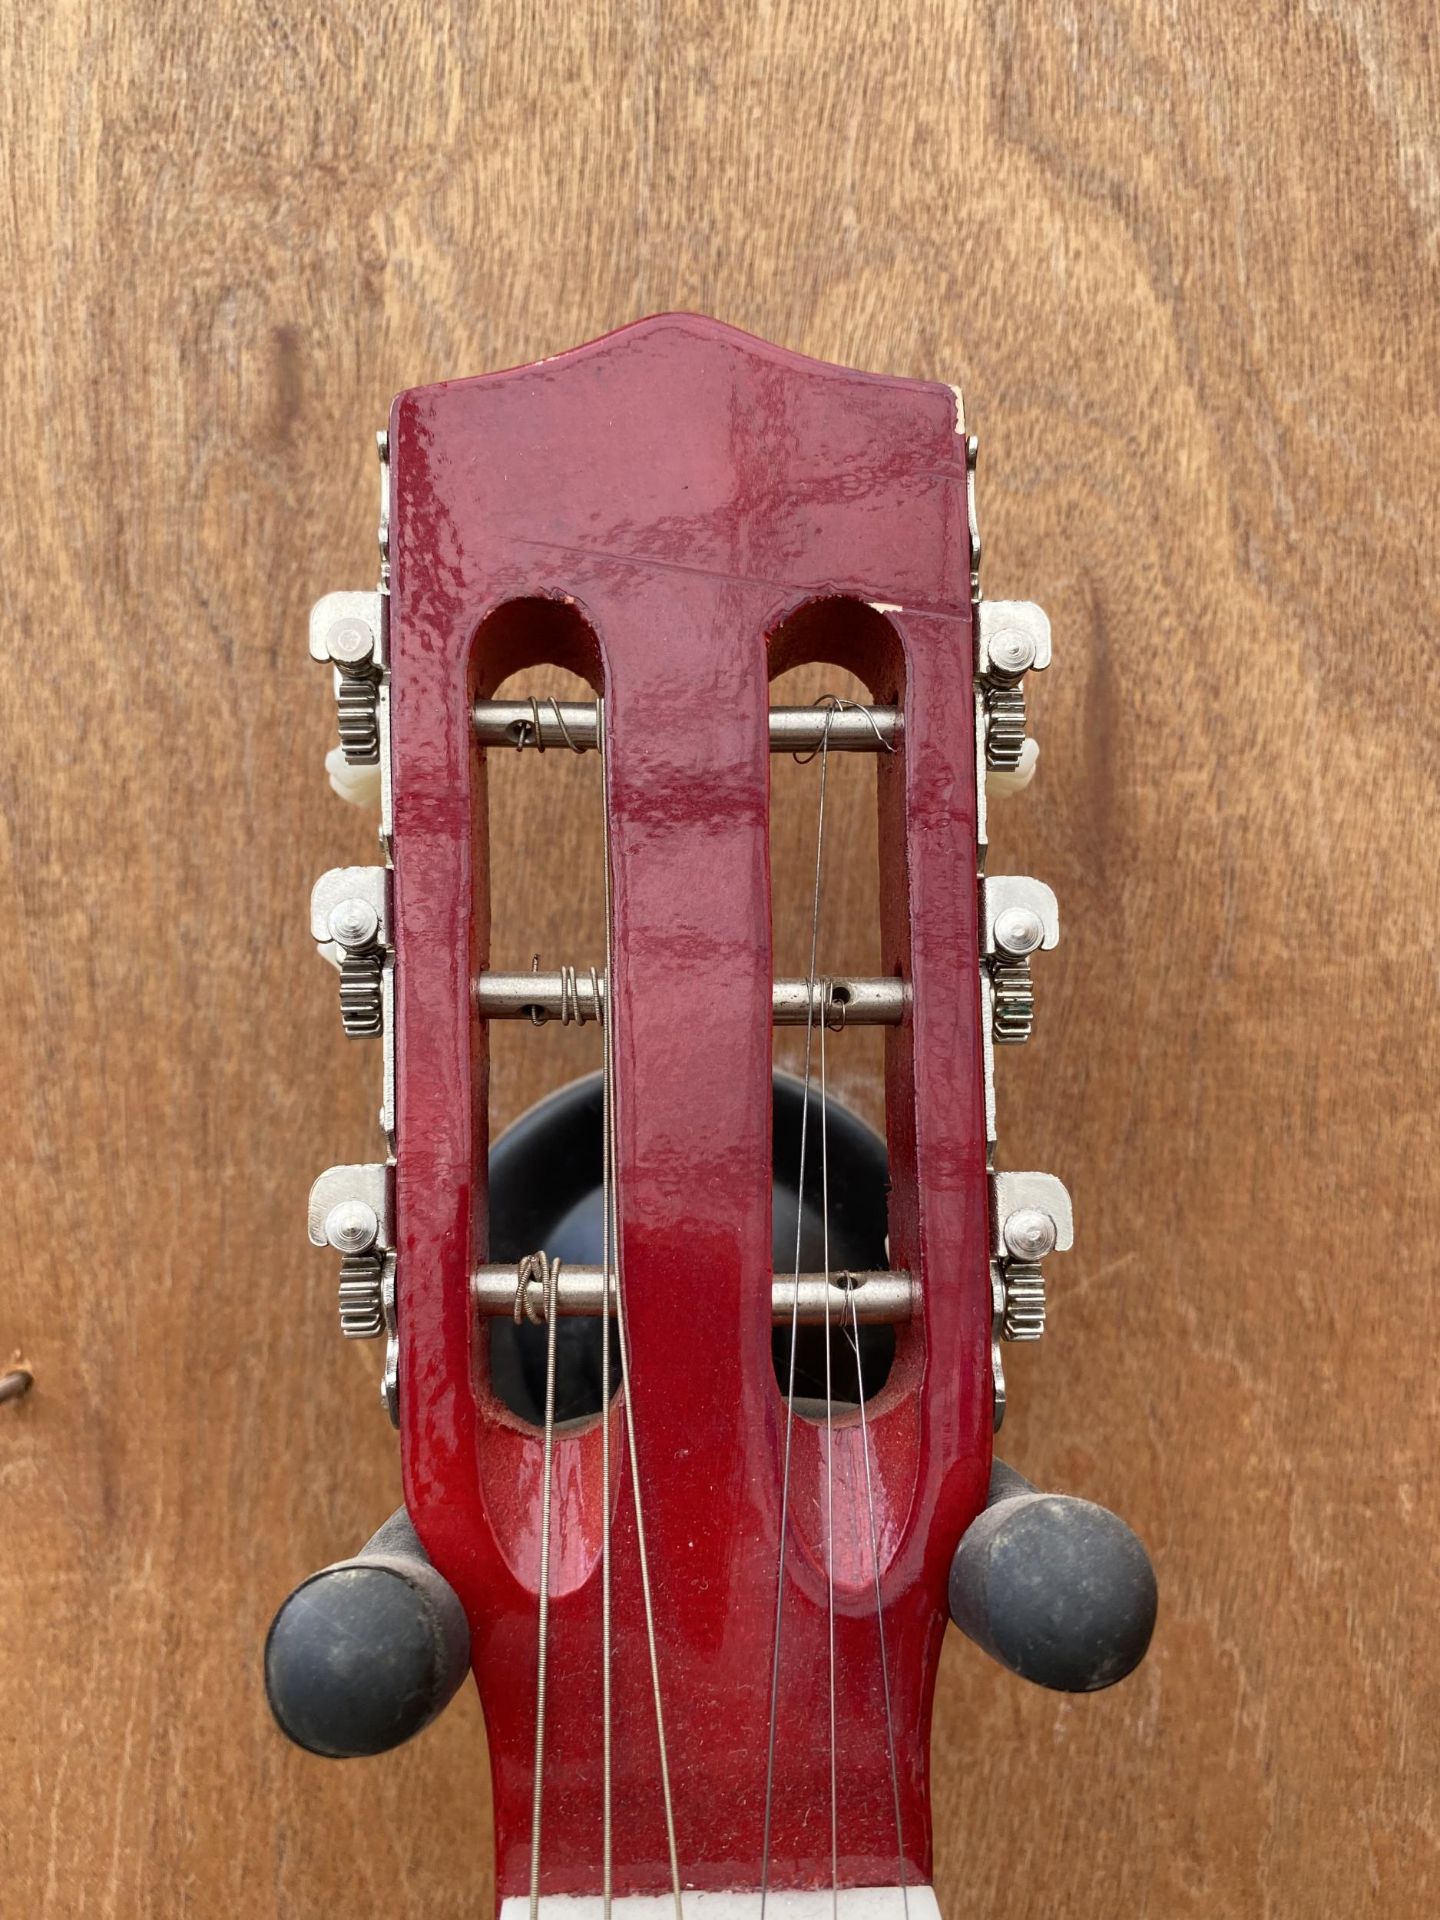 AN ACOUSTIC GUITAR - Image 3 of 3